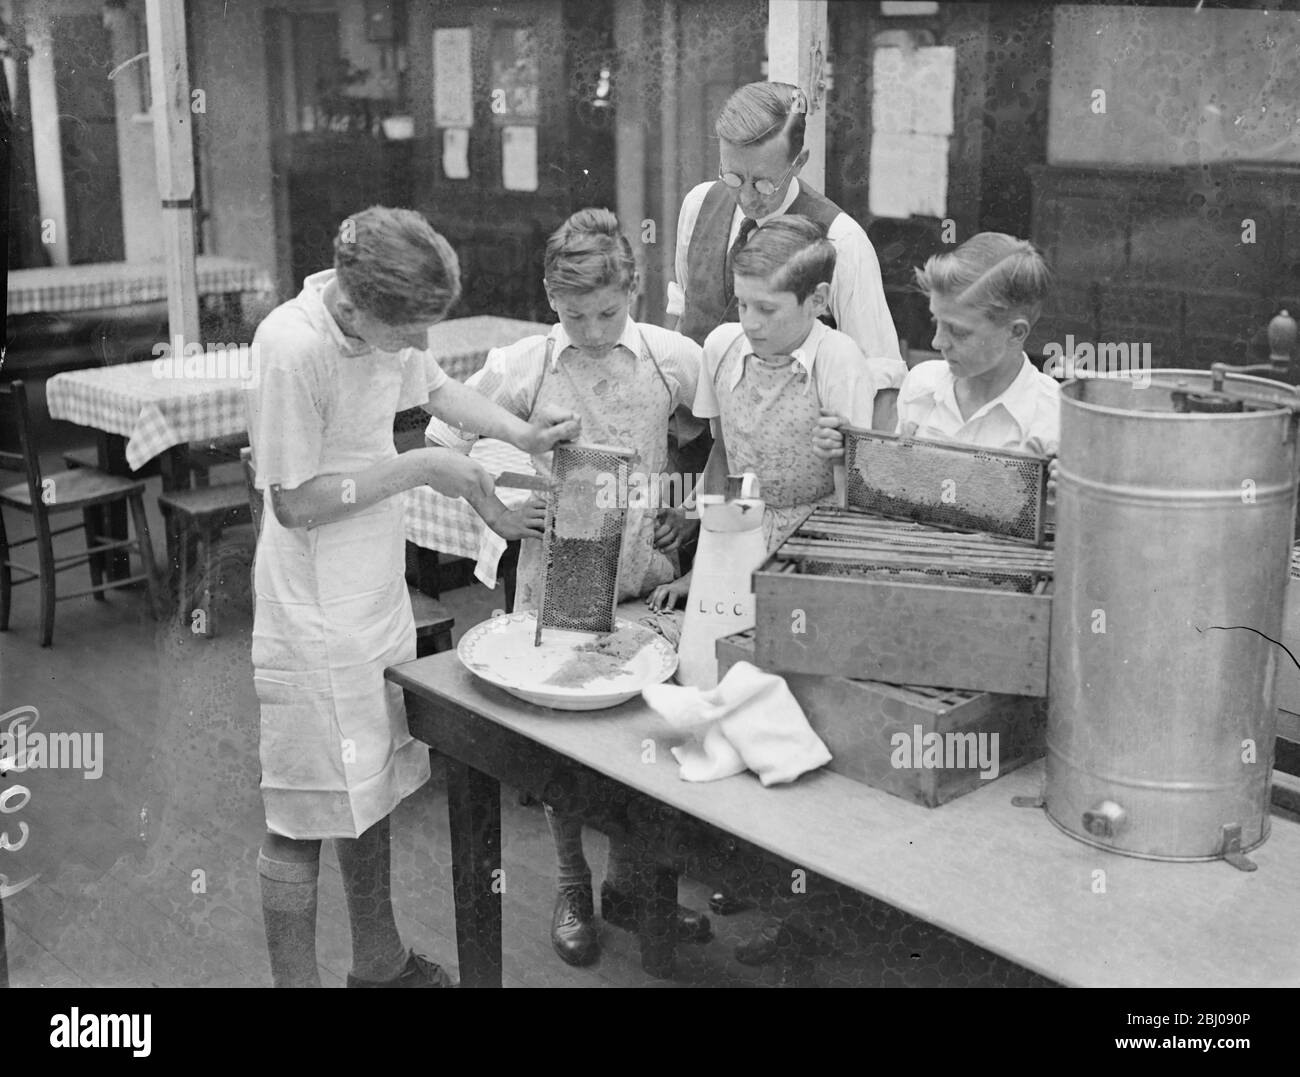 Pupils of Wood Lane open-air school placing the honeycomb in a kind of churn which removes the honey by centrifugal force. Beekeeping is now included in the curriculum of the Wood Lane School in Shepherd's Bush, London. The pupils are given complete instruction in the art from gathering the nectar to the final process of bottling the honey. - 5 September 1937. Stock Photo